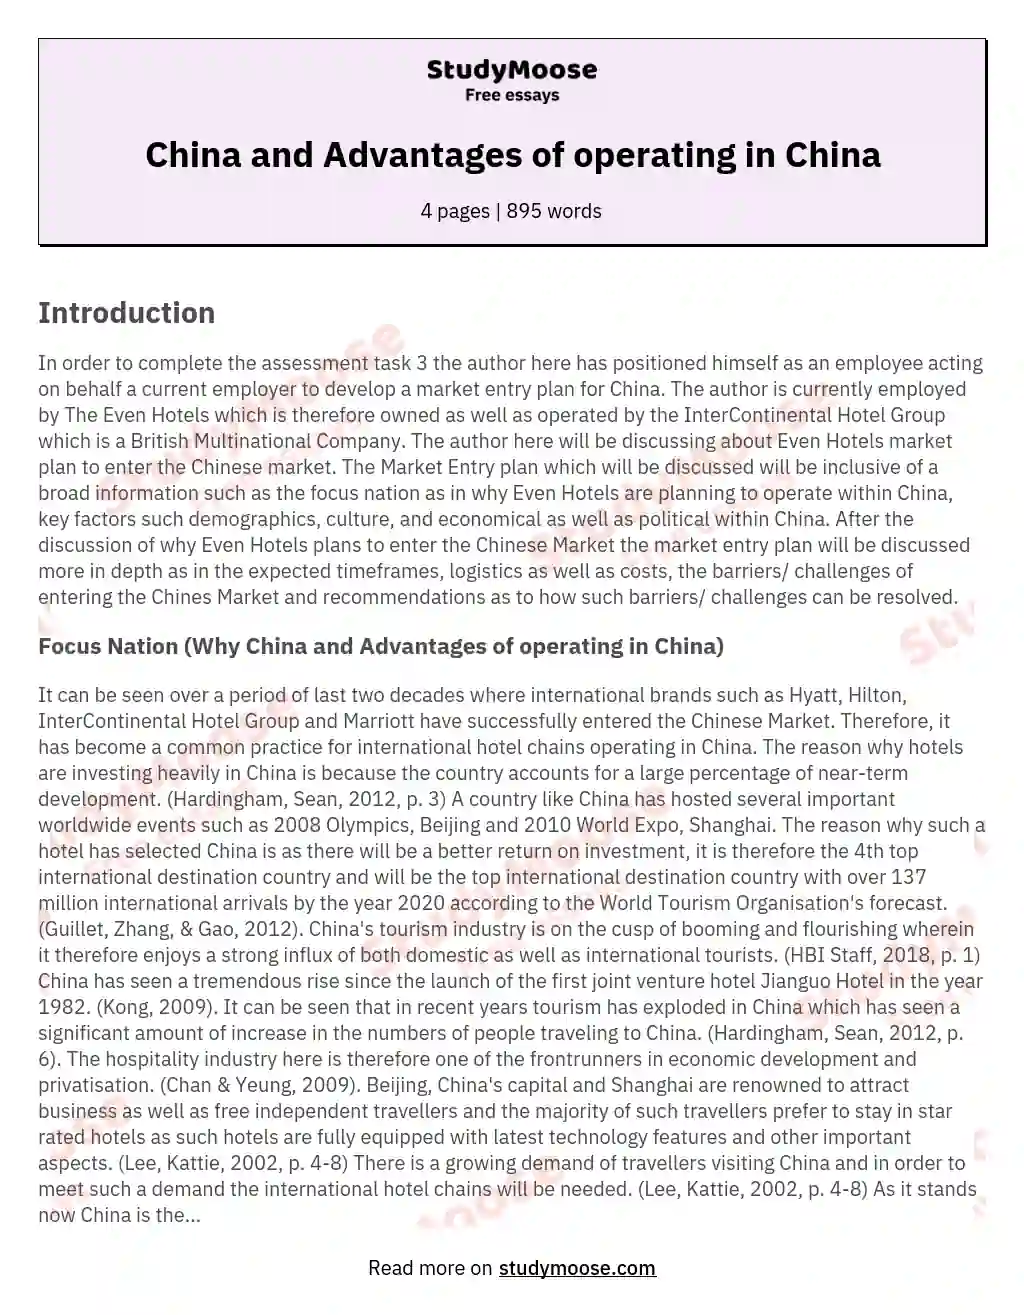 China and Advantages of operating in China essay